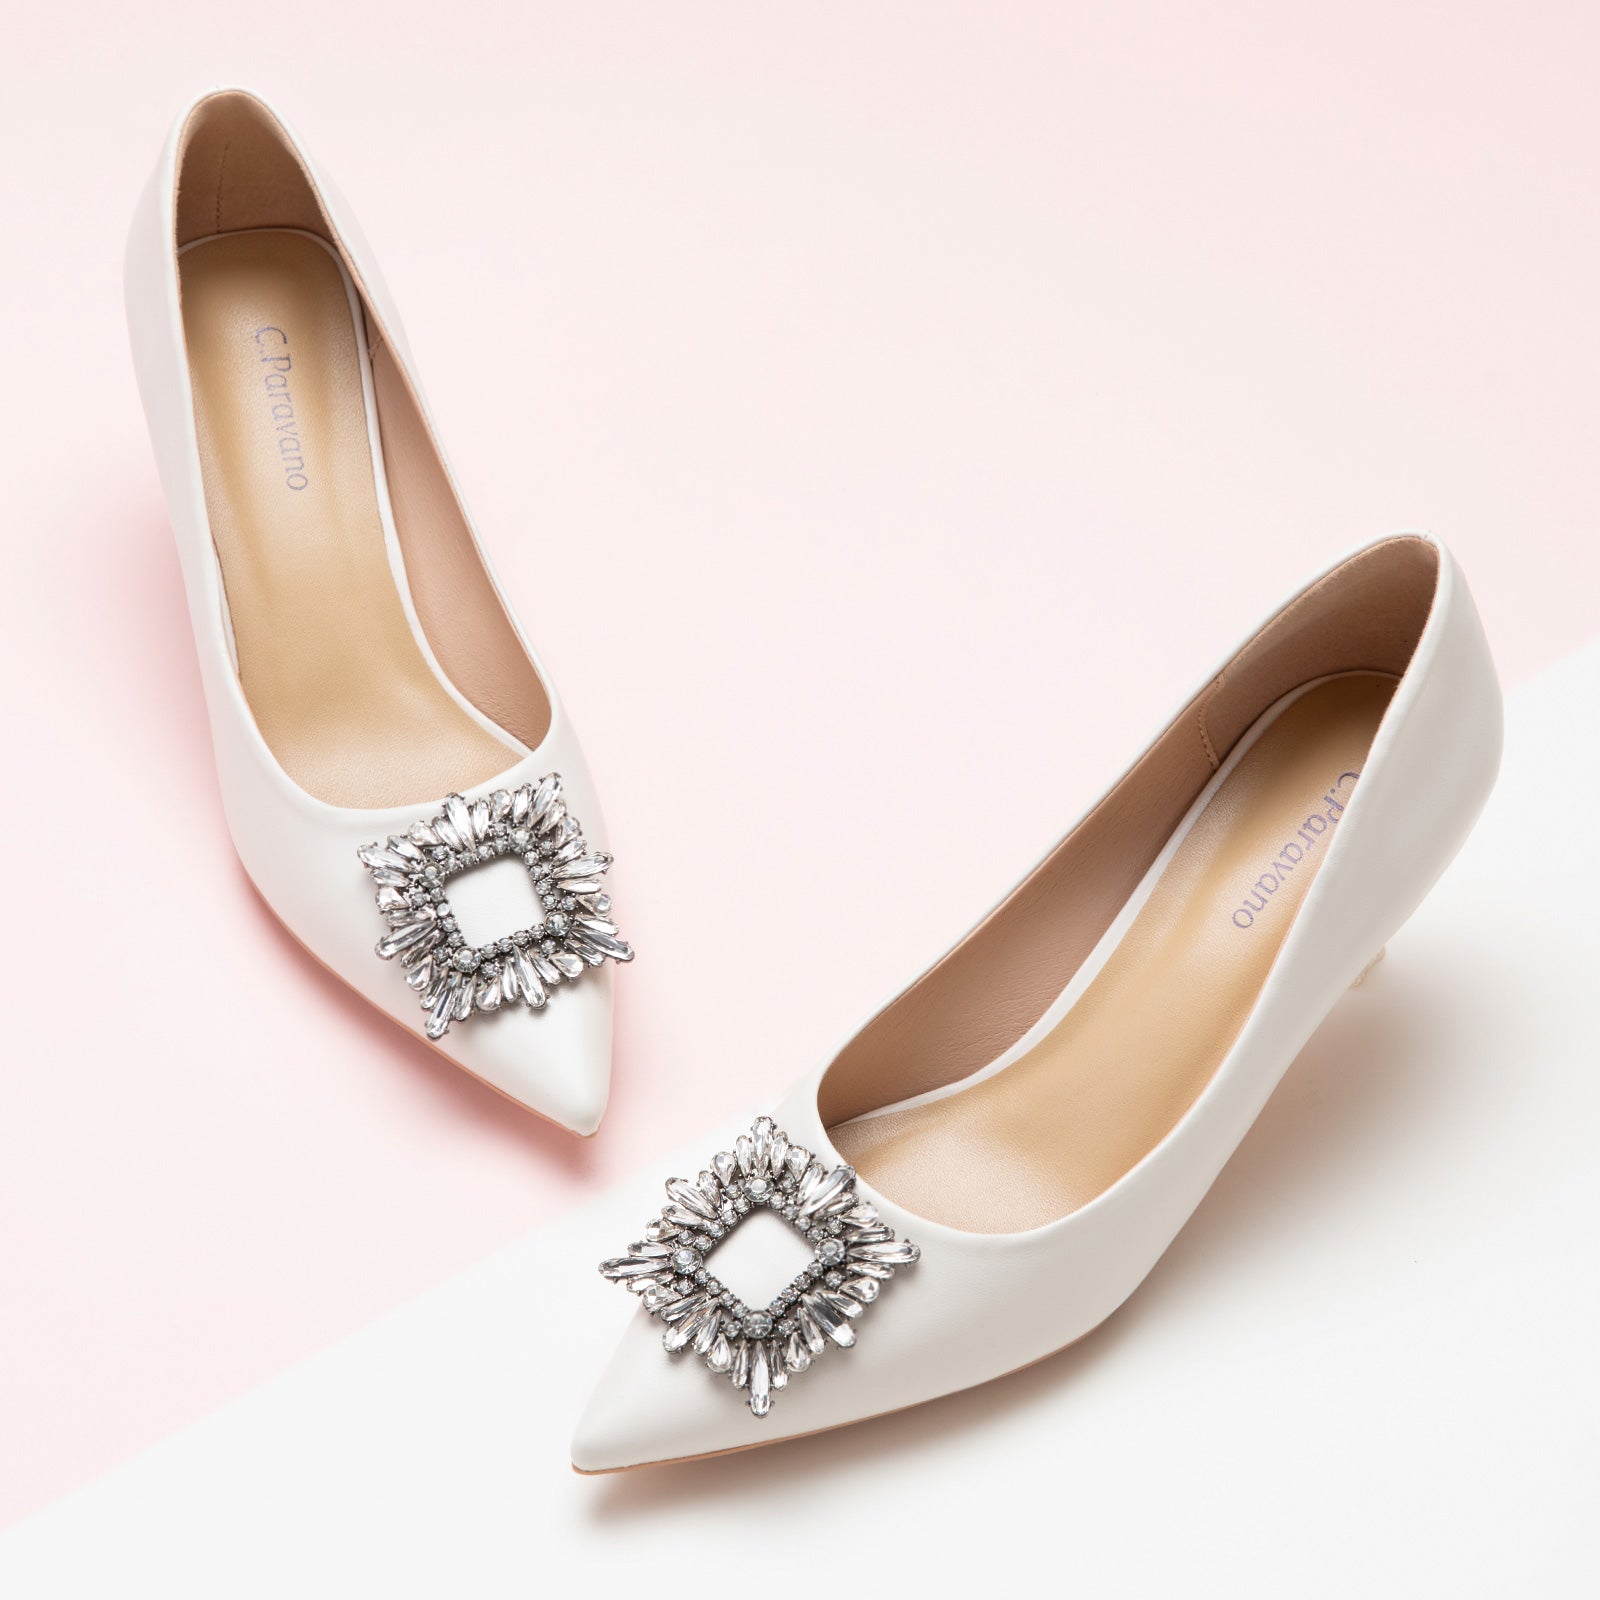 Crisp white pumps adorned with sparkling crystal embellishments and a stylish buckle – timeless and versatile for various occasions.